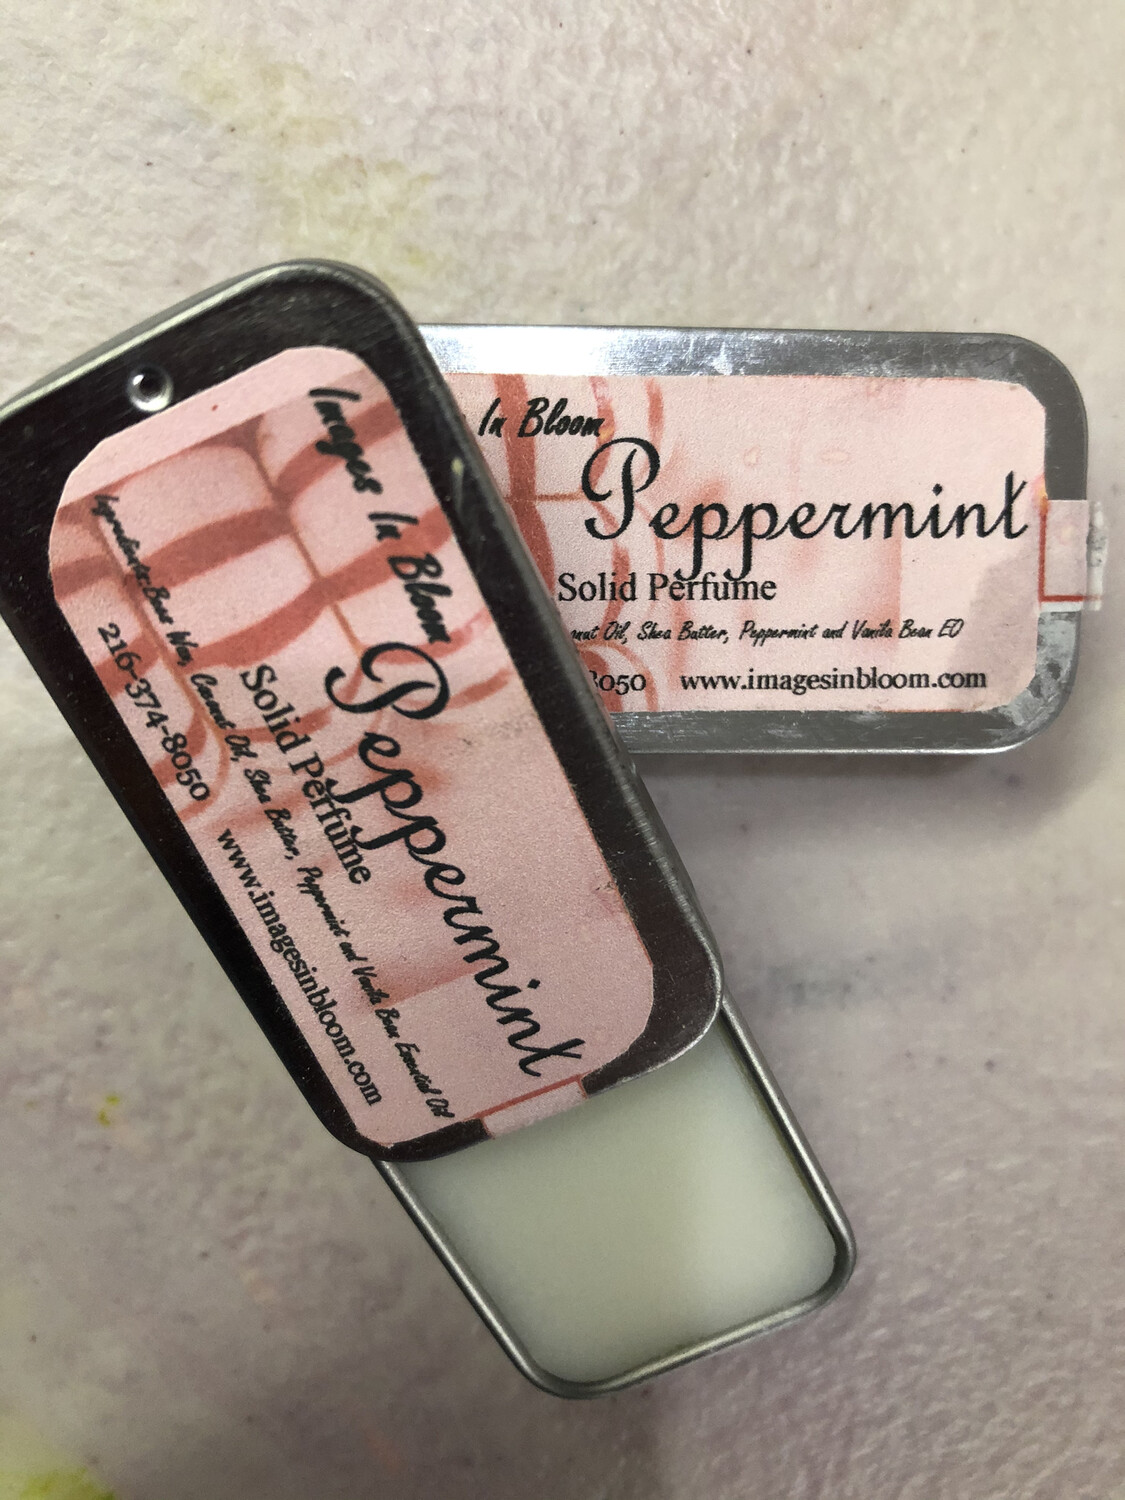 Peppermint solid perfume